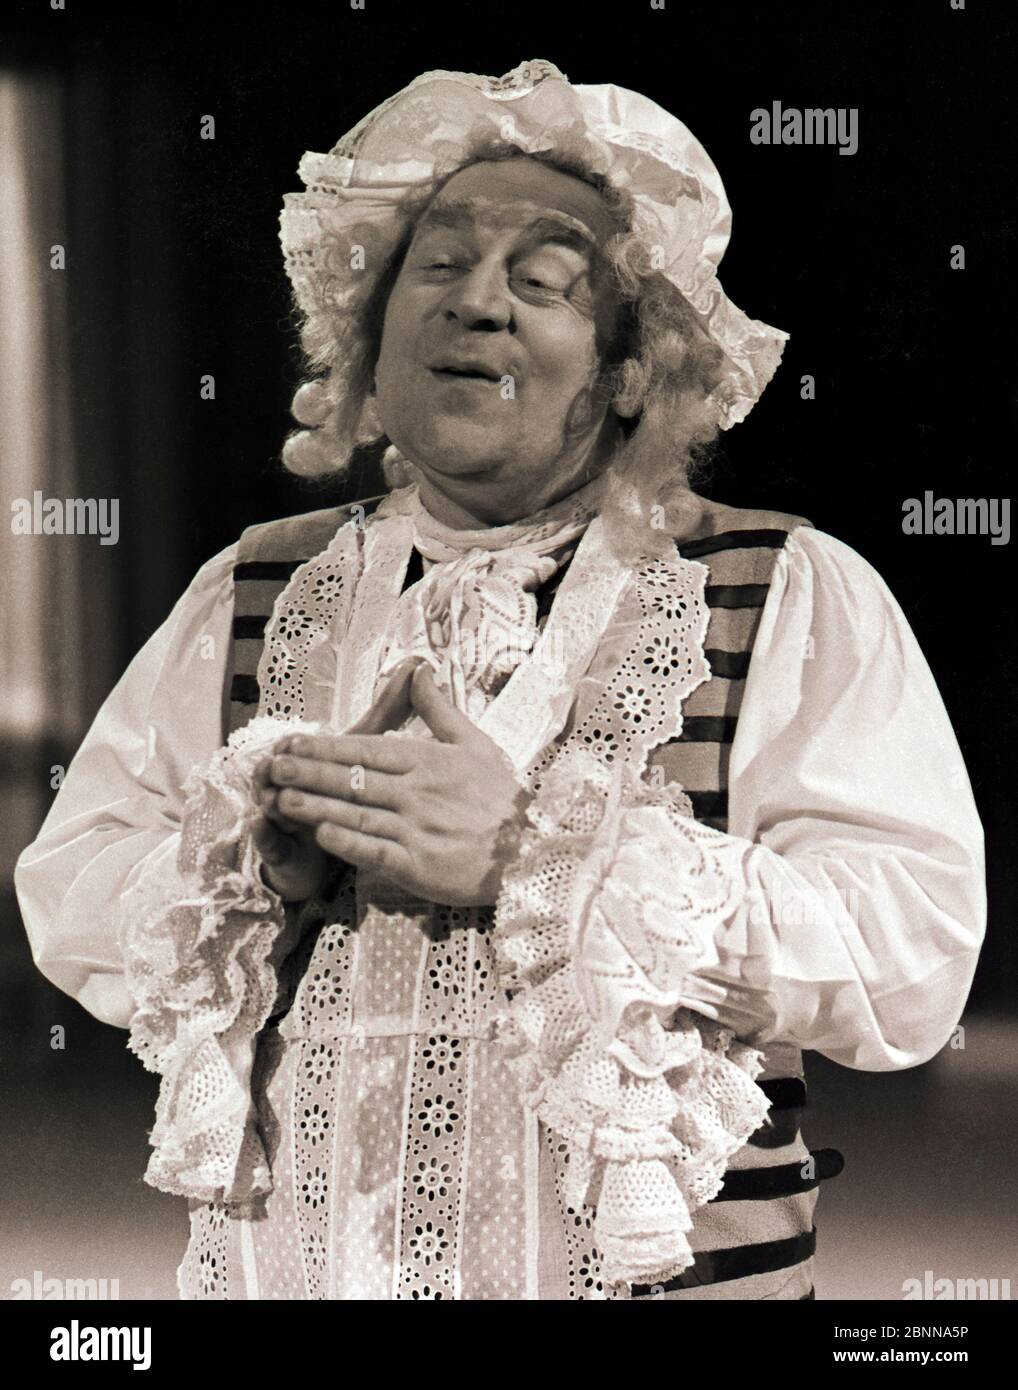 chamber singer Reiner Suess, the passbuffo of the Berlin State Opera, moderated the popular DFF entertainment program 'There is music in there' from 1968 to 1985, produced in the house of the cheerful muse in Leipzig. Stock Photo